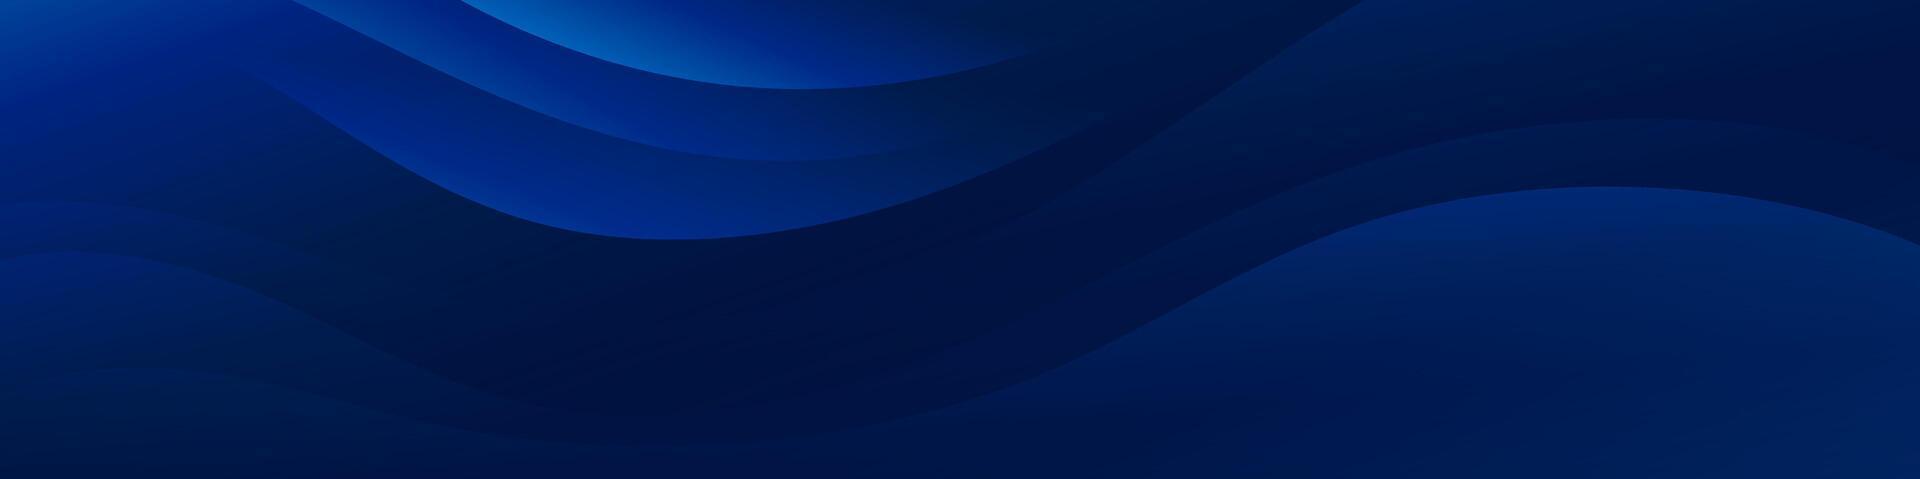 Abstract dark blue banner color with a unique wavy design. It is ideal for creating eye catching headers, promotional banners, and graphic elements with a modern and dynamic look. vector